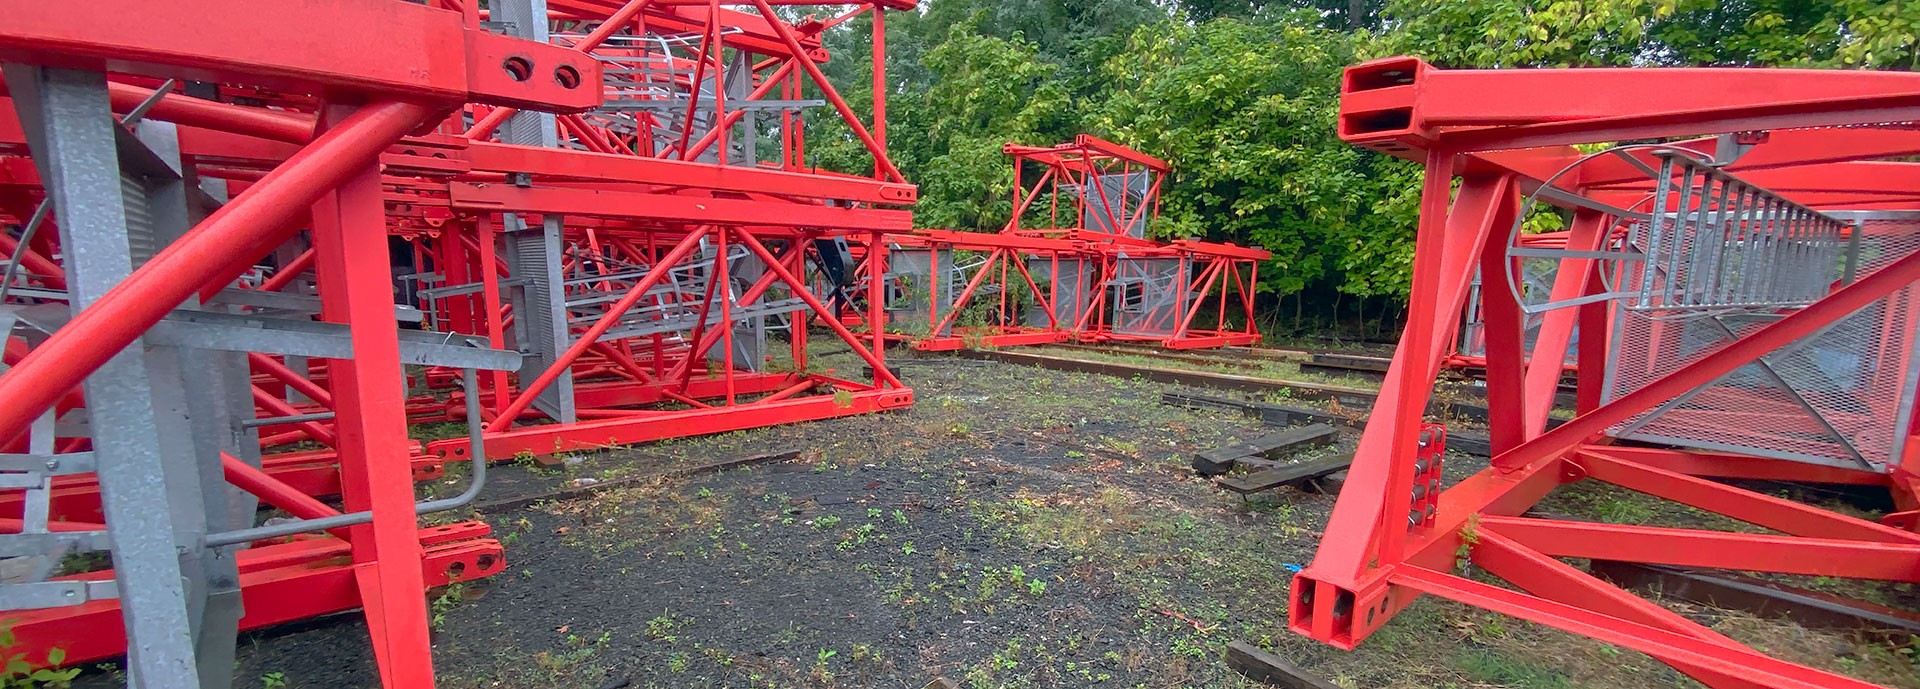 close up of red steel structures on gravel